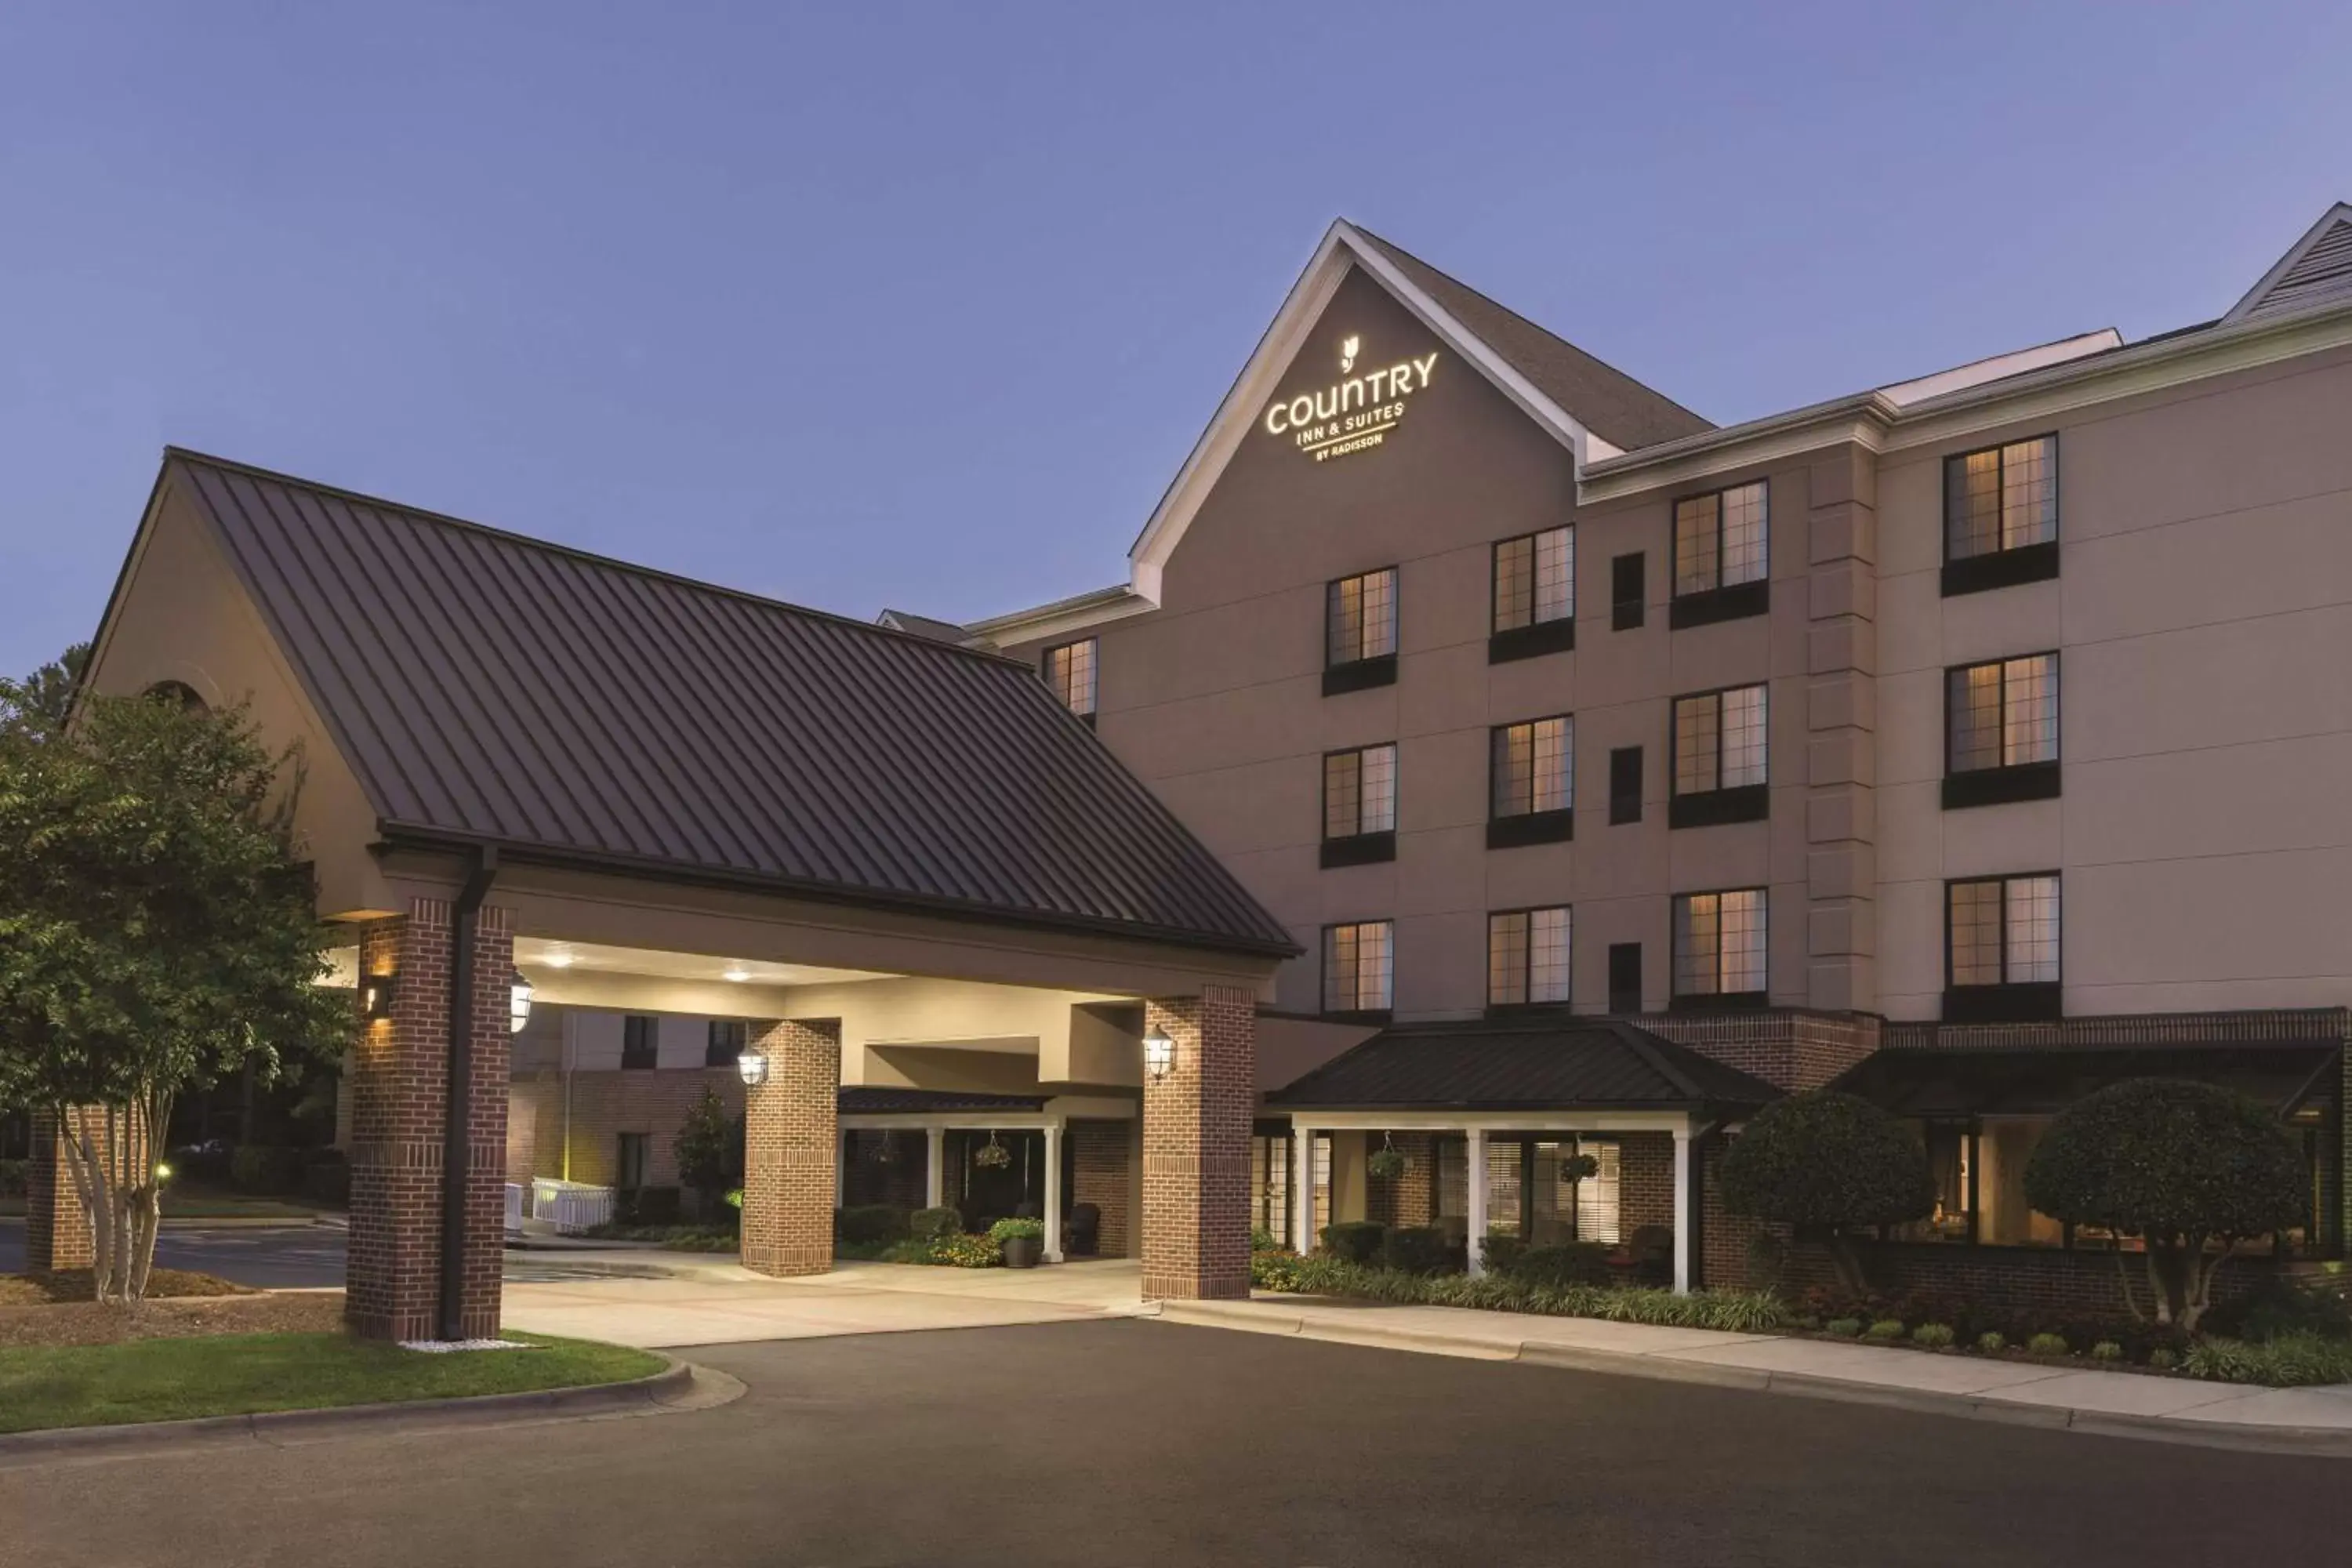 Property Building in Country Inn & Suites by Radisson, Raleigh-Durham Airport, NC